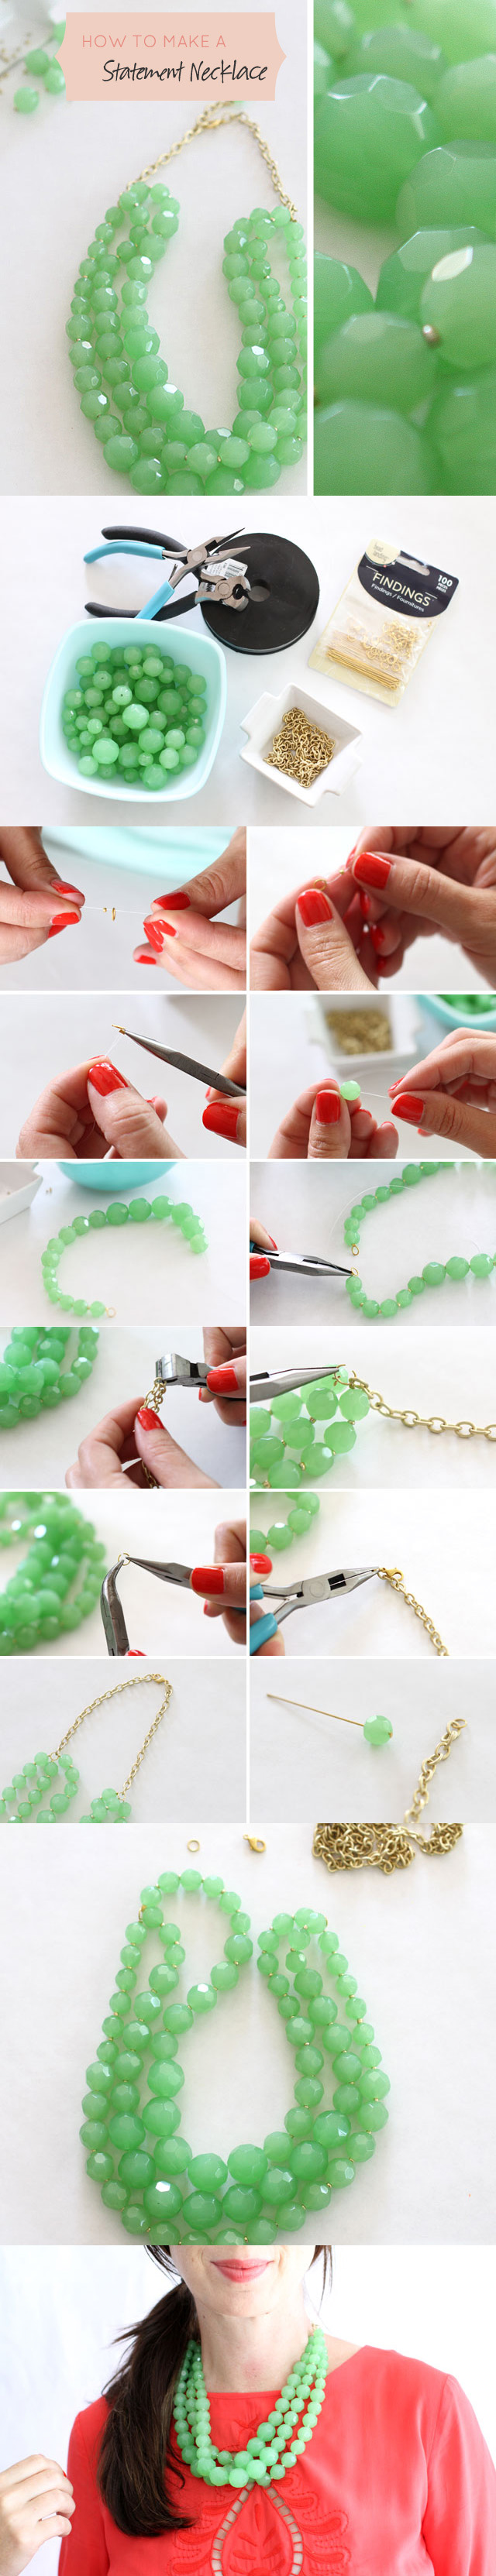 HOW TO MAKE A STATEMENT NECKLACE